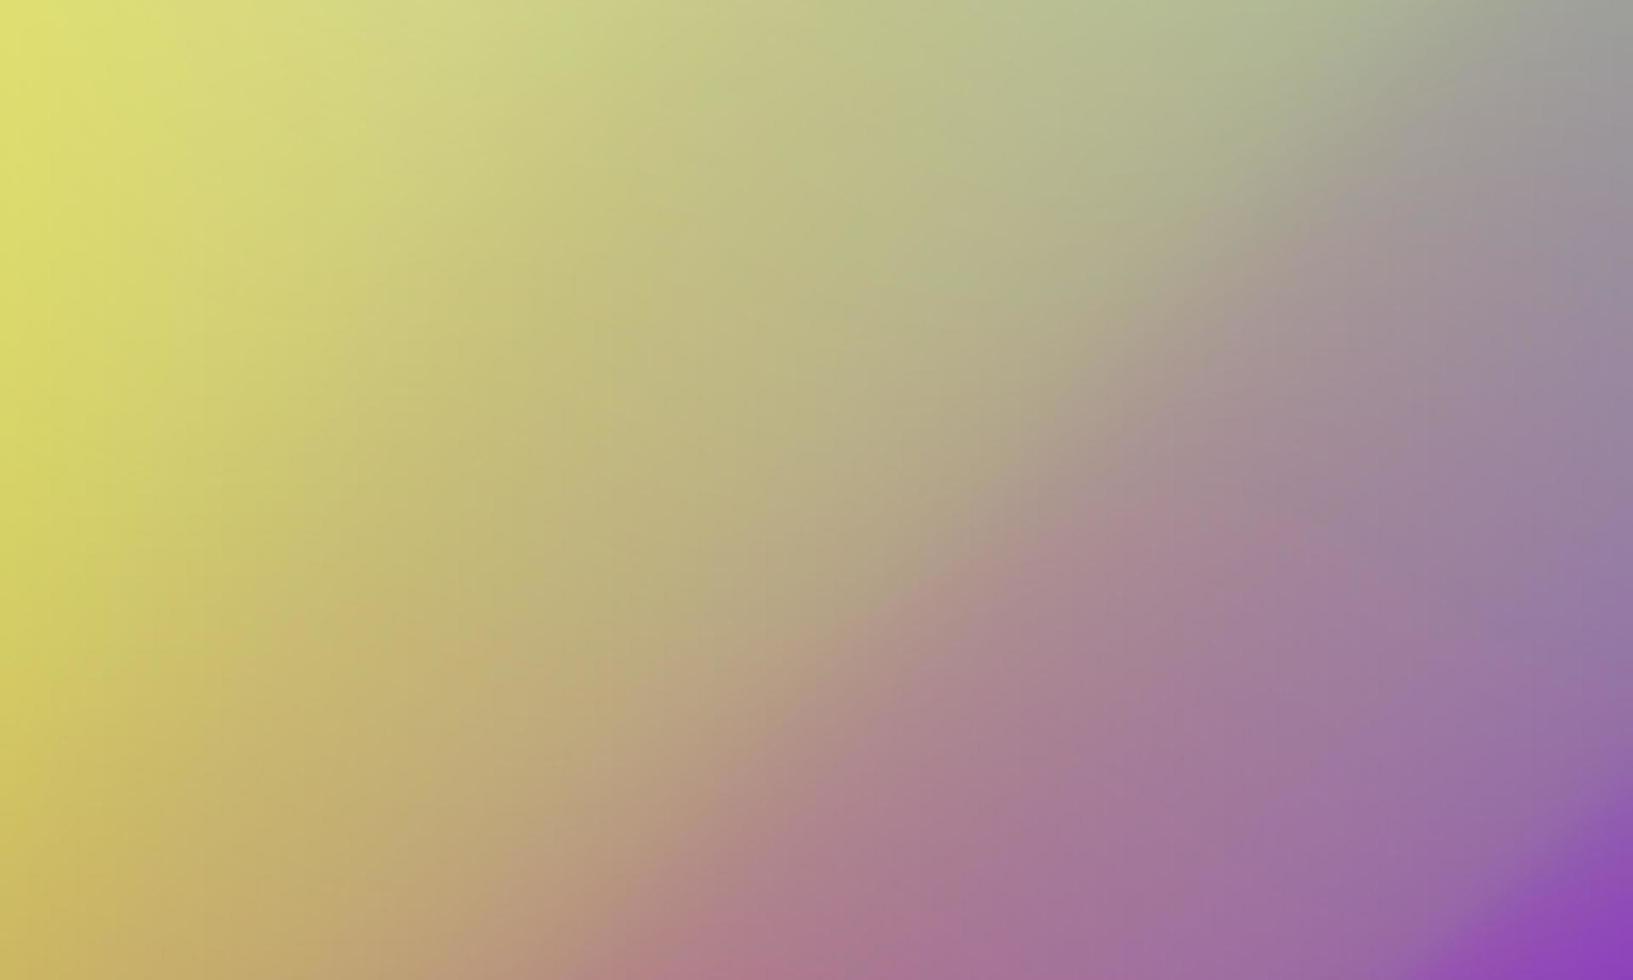 beautiful colorful gradient background. combination of bright colors. soft and smooth texture. used for background vector